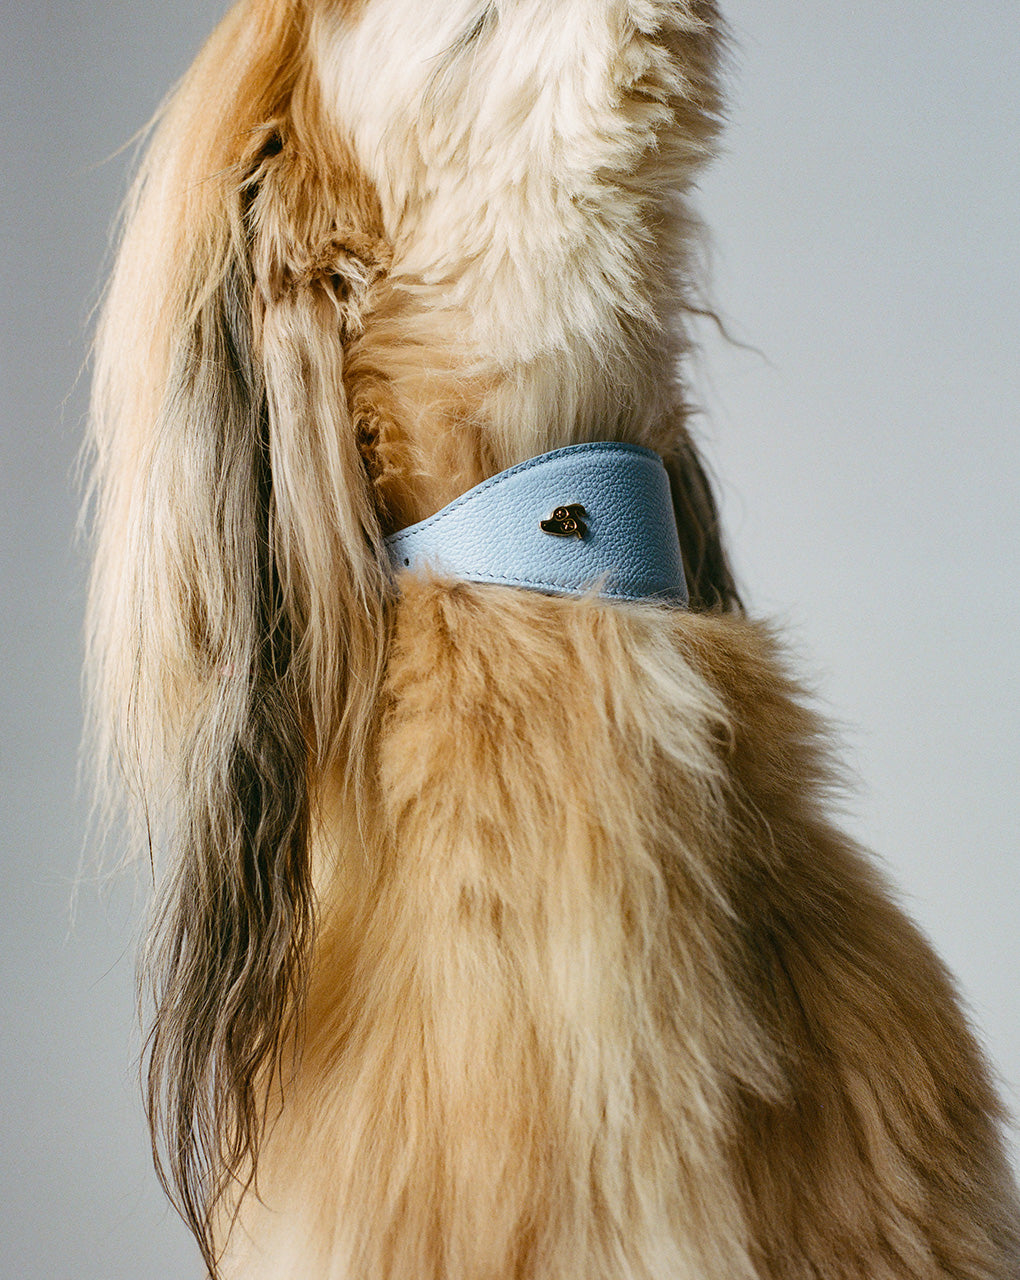 Afghan Hound in a white studio, wearing a dog collar in the colour ‘Ciel’ (light blue), made from grained luxury leather, tailored for greyhounds (the dog collar is wider than a regular dog collar). You can also see the gold-plated logo on the dog collar.